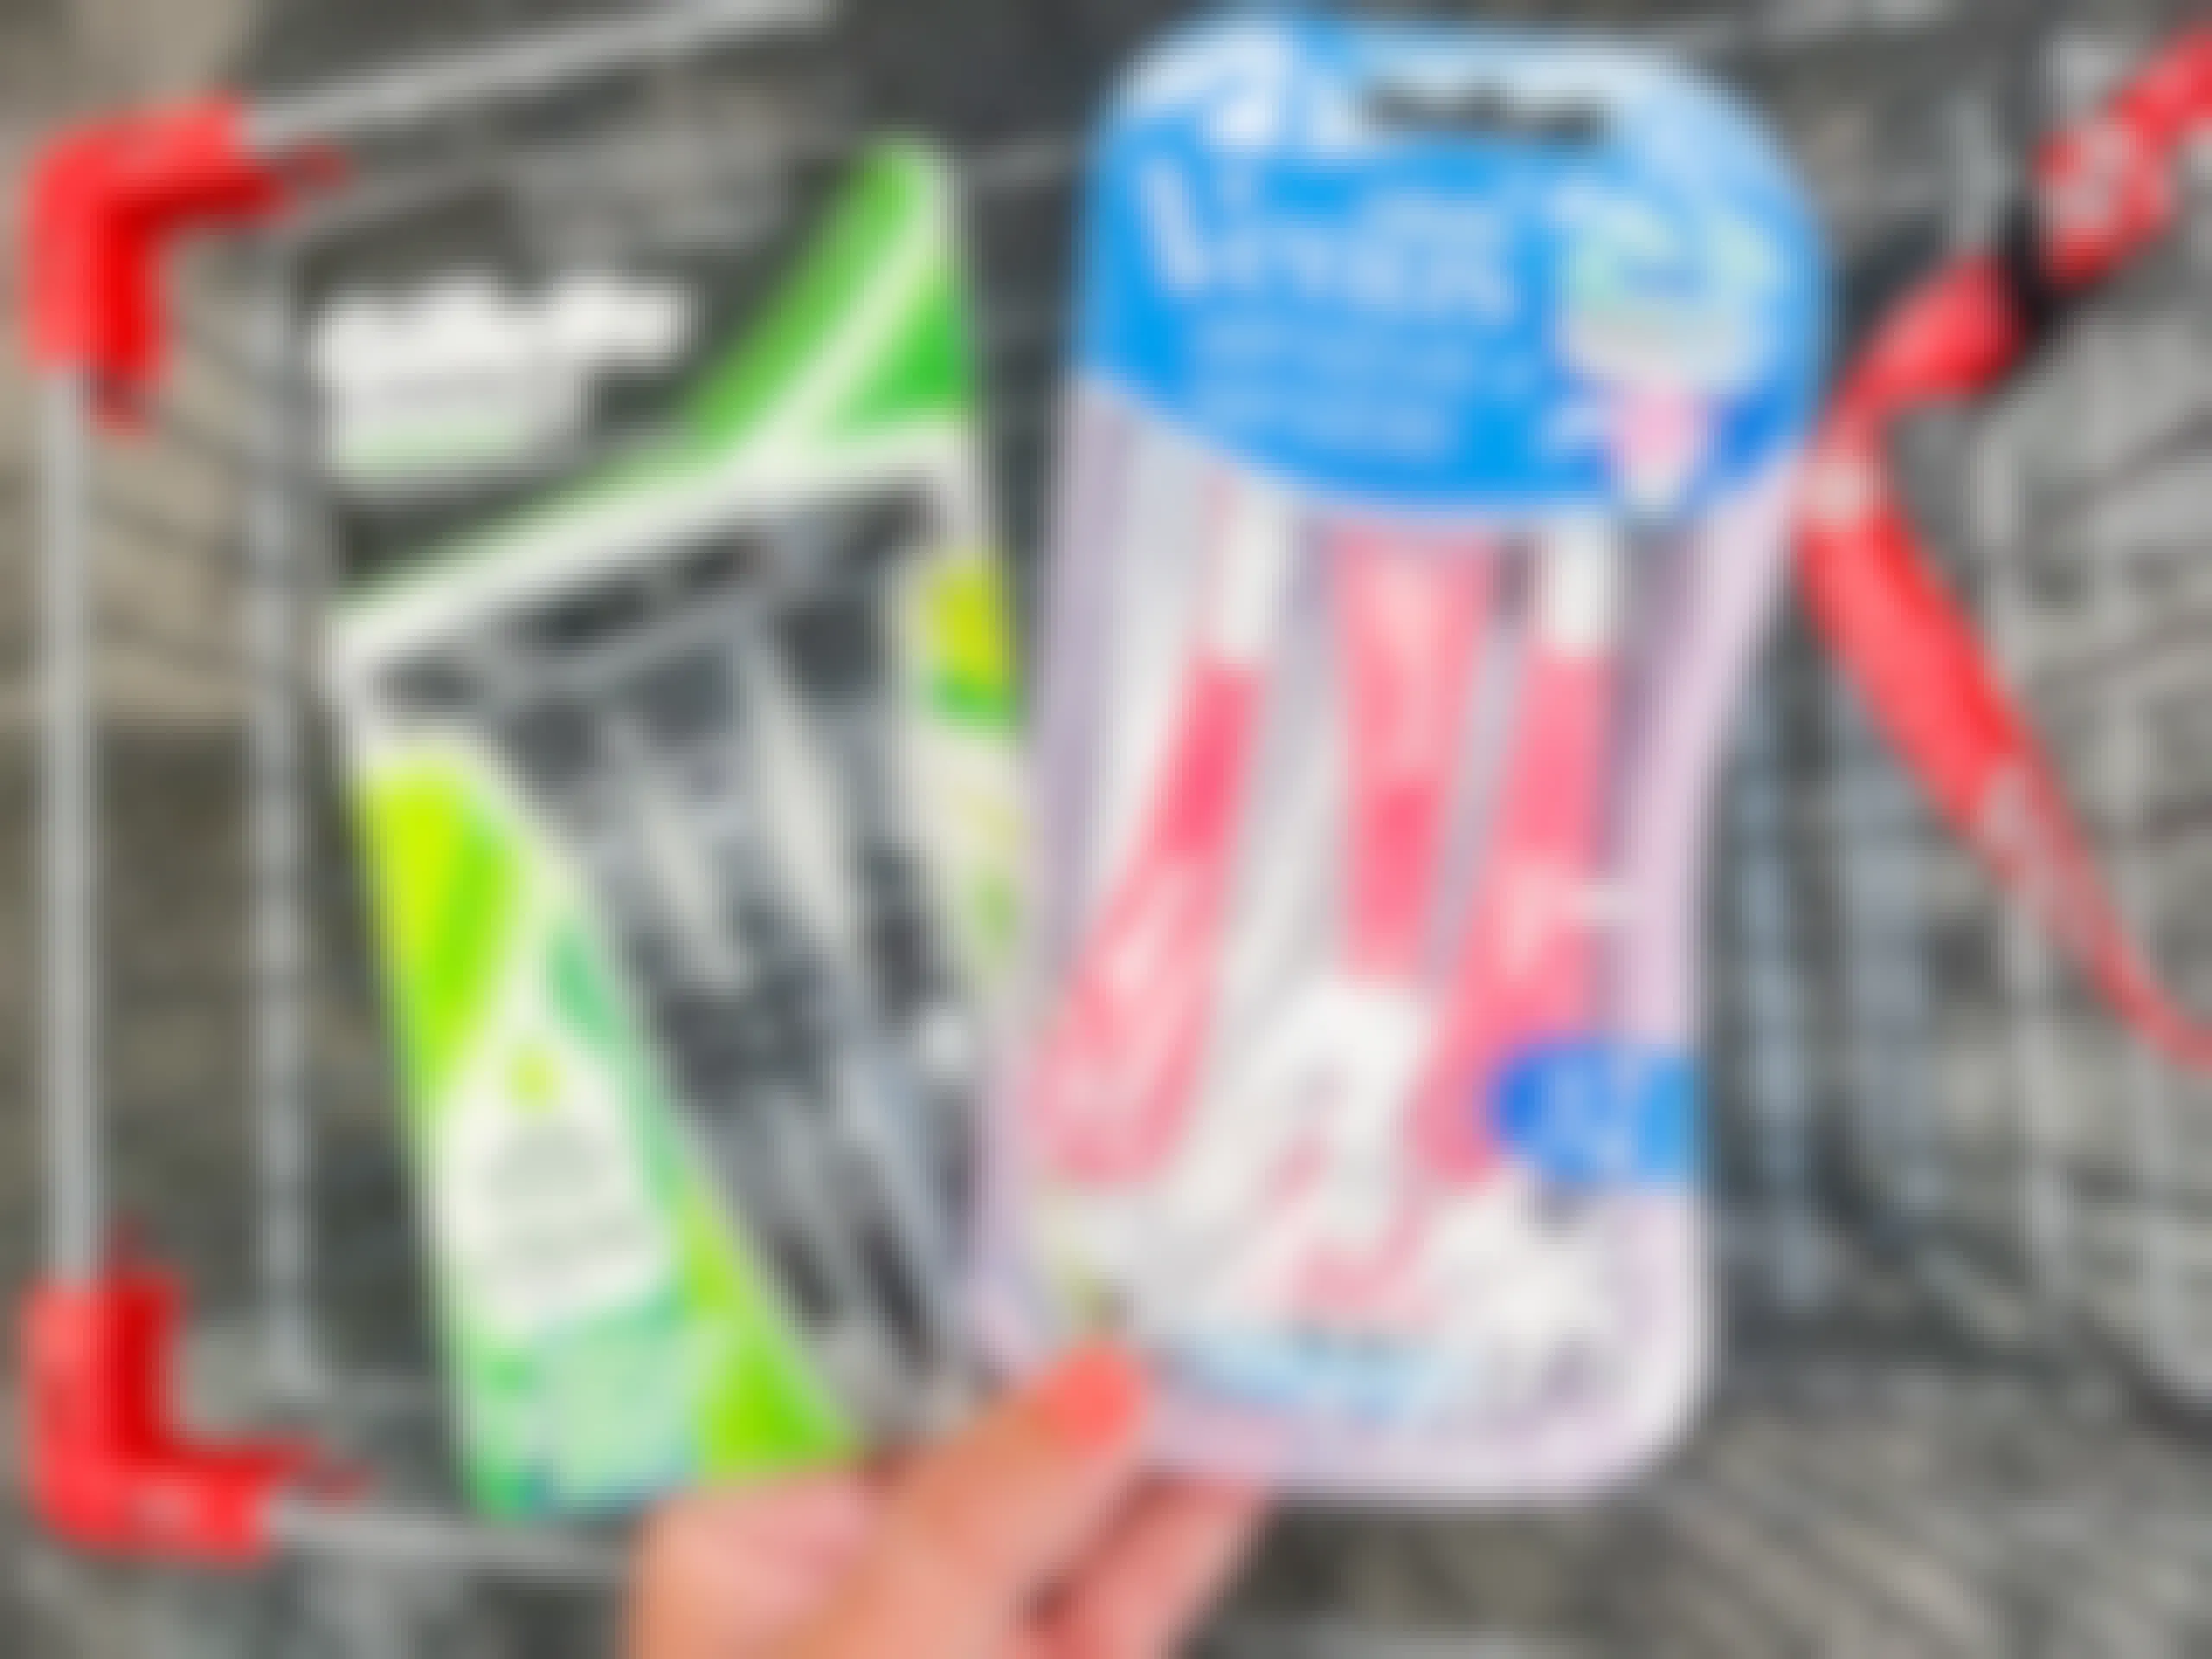 hand holding pack of Gillette Mach3 razors and Gillette Venus Sensitive razors in front of shopping cart